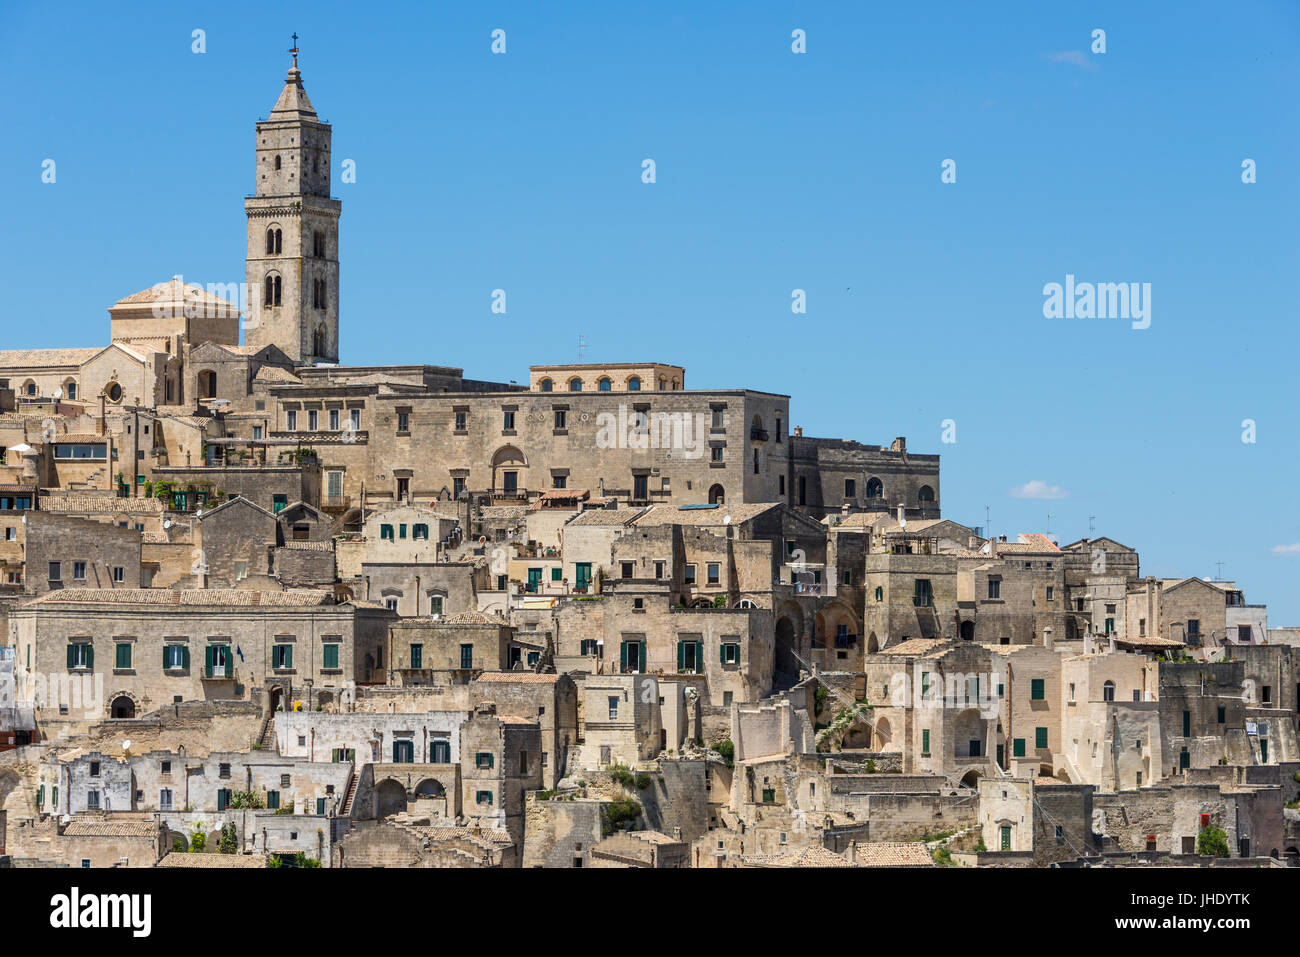 Old houses and a church in ancient architecture in the same kind of stone in a town built upon a hill, known as the Sassi di Matera in Basilicata, Ita Stock Photo